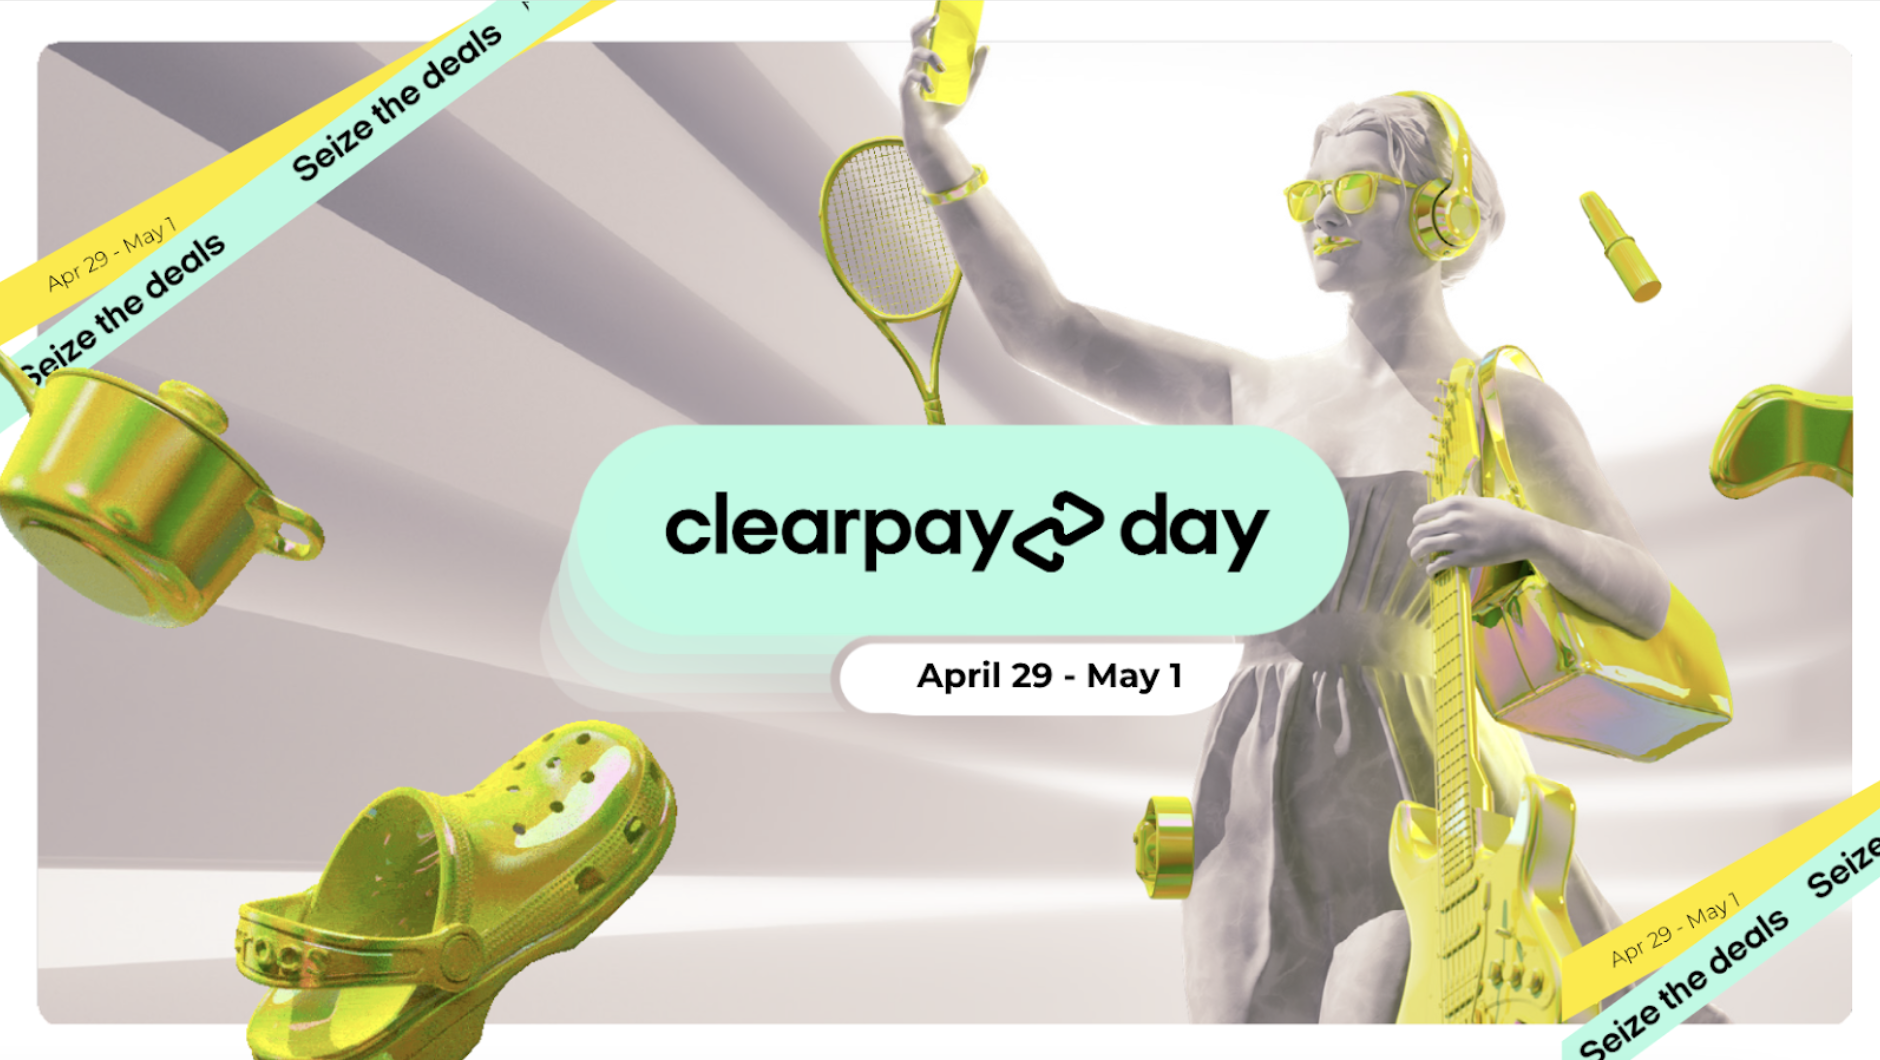 Clearpay Scores Big with Small and Medium Retail Partners on Clearpay Day